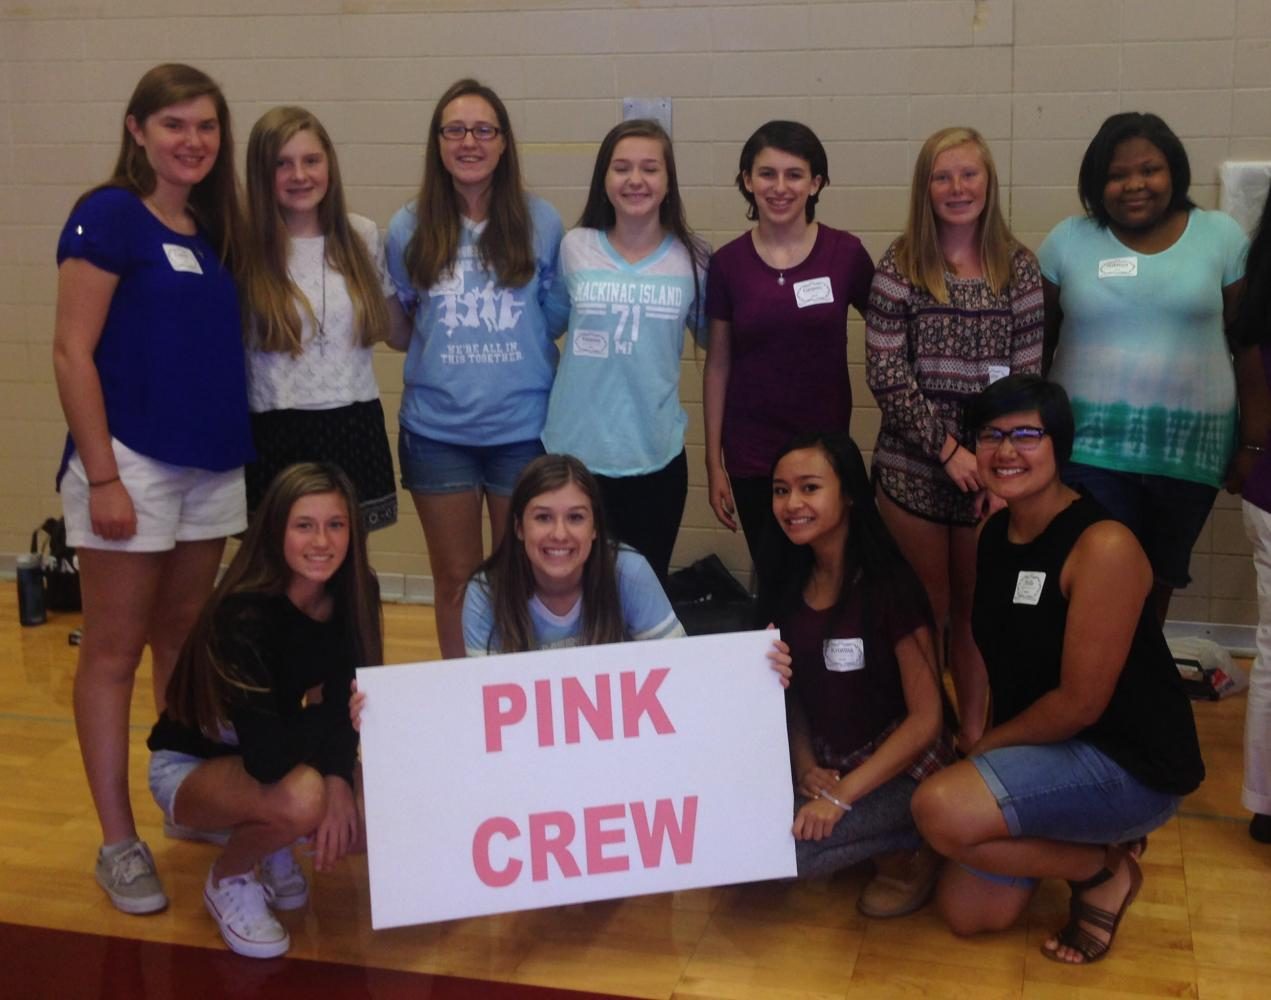 Junior year I completed an intense Link Leader application process, and was one of 44 girls who were selected out of a pool of 111, giving me the opportunity to lead the Pink Crew. (Photo Credit: Mercy Link Crew)